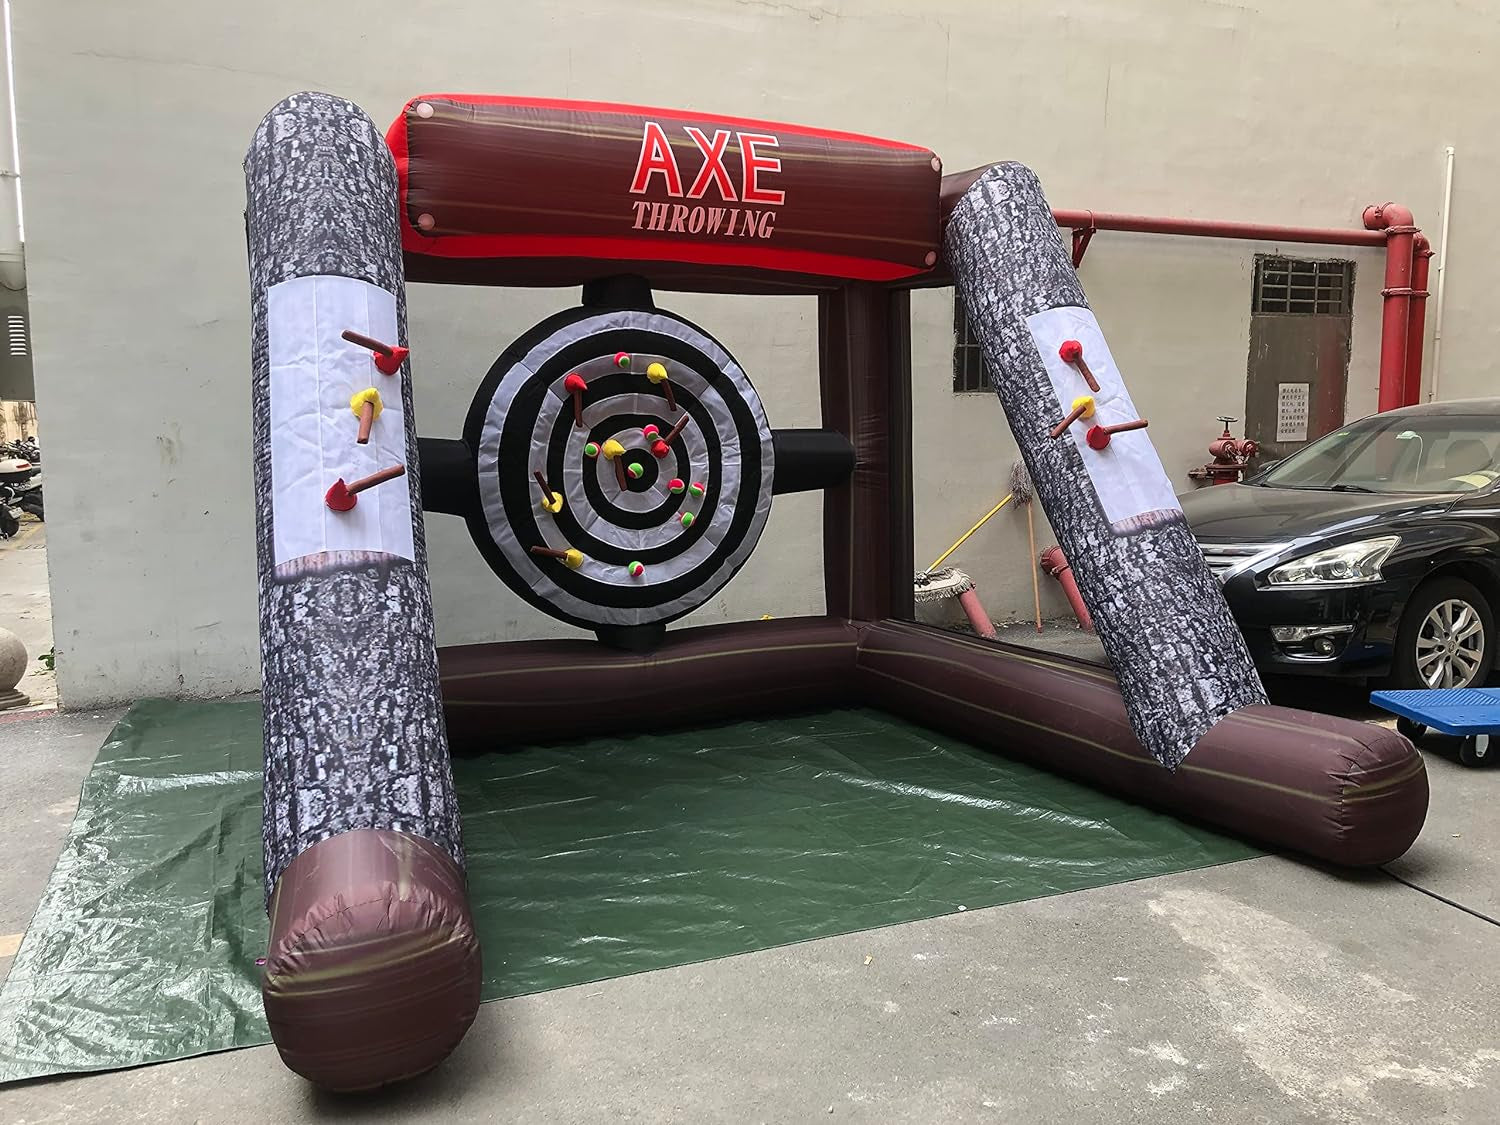 Inflatable Axe Throwing Game + Inflatable Ball Toss Target Dart Board for Backyard/Birthday/School/Team/Party Events